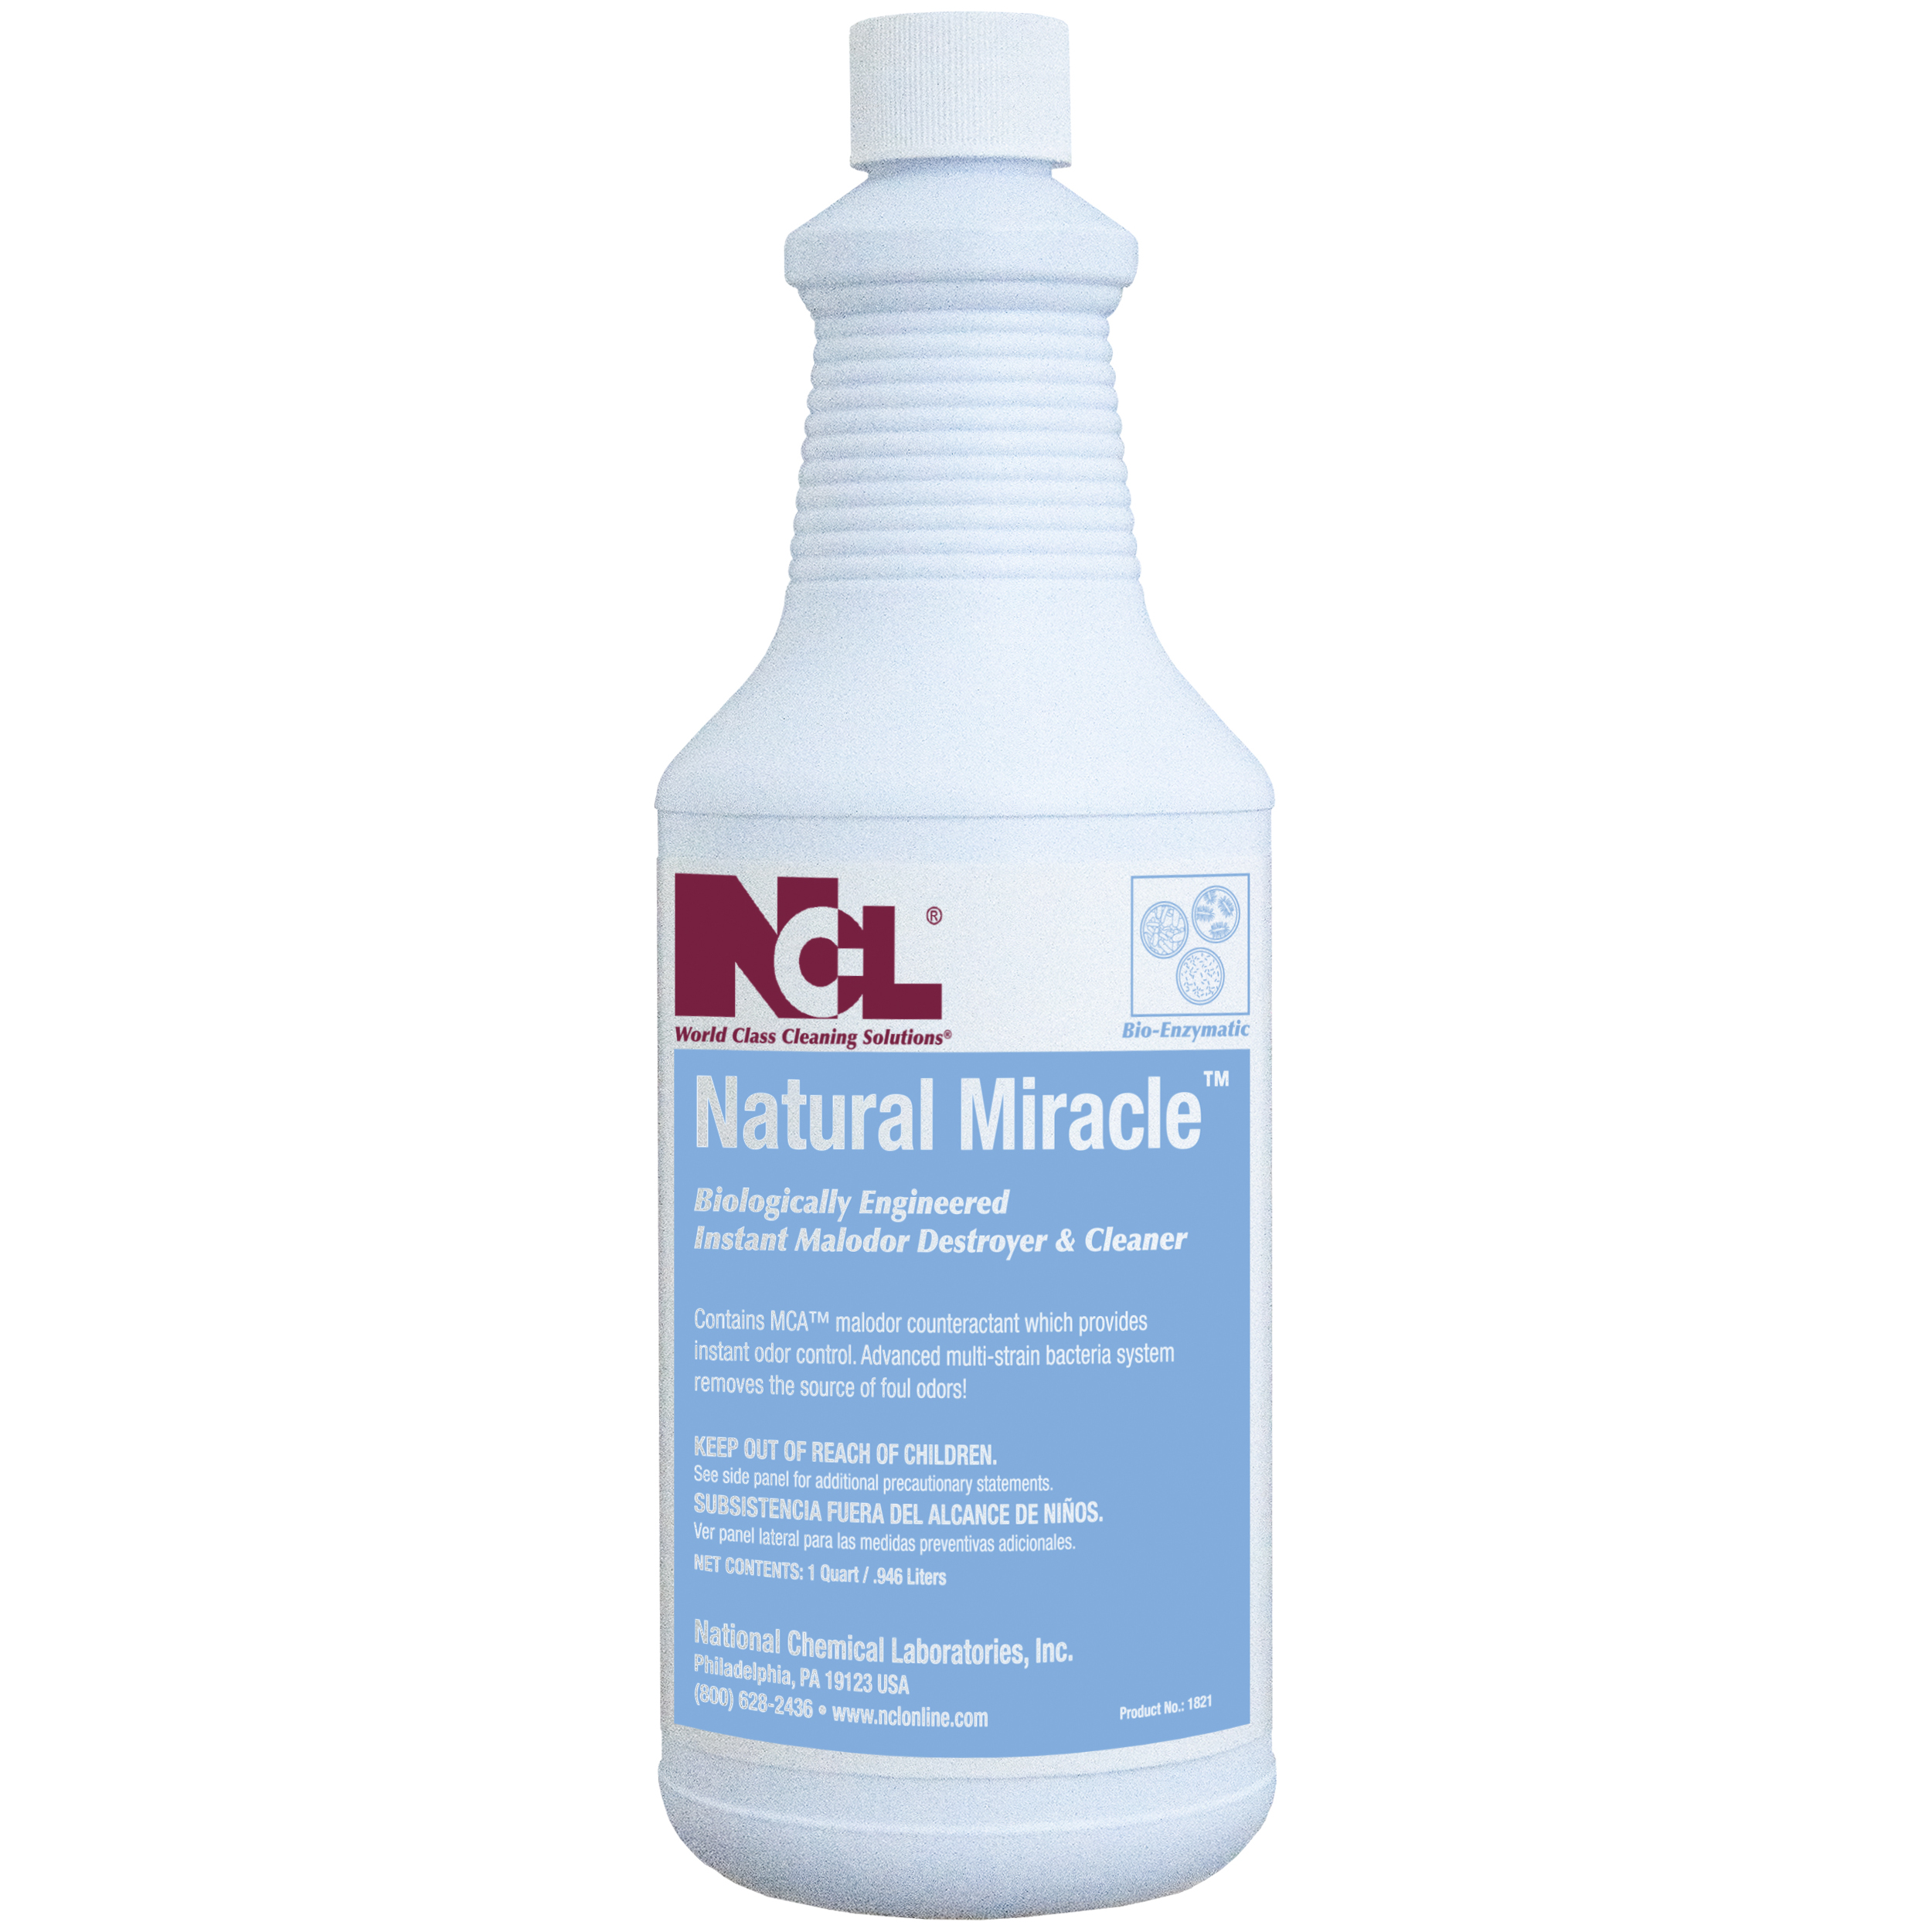  NATURAL MIRACLE Biologically Engineered Instant Malodor Destroyer & Cleaner 12/32 oz (1 Qt.) Case (NCL1821-36) 